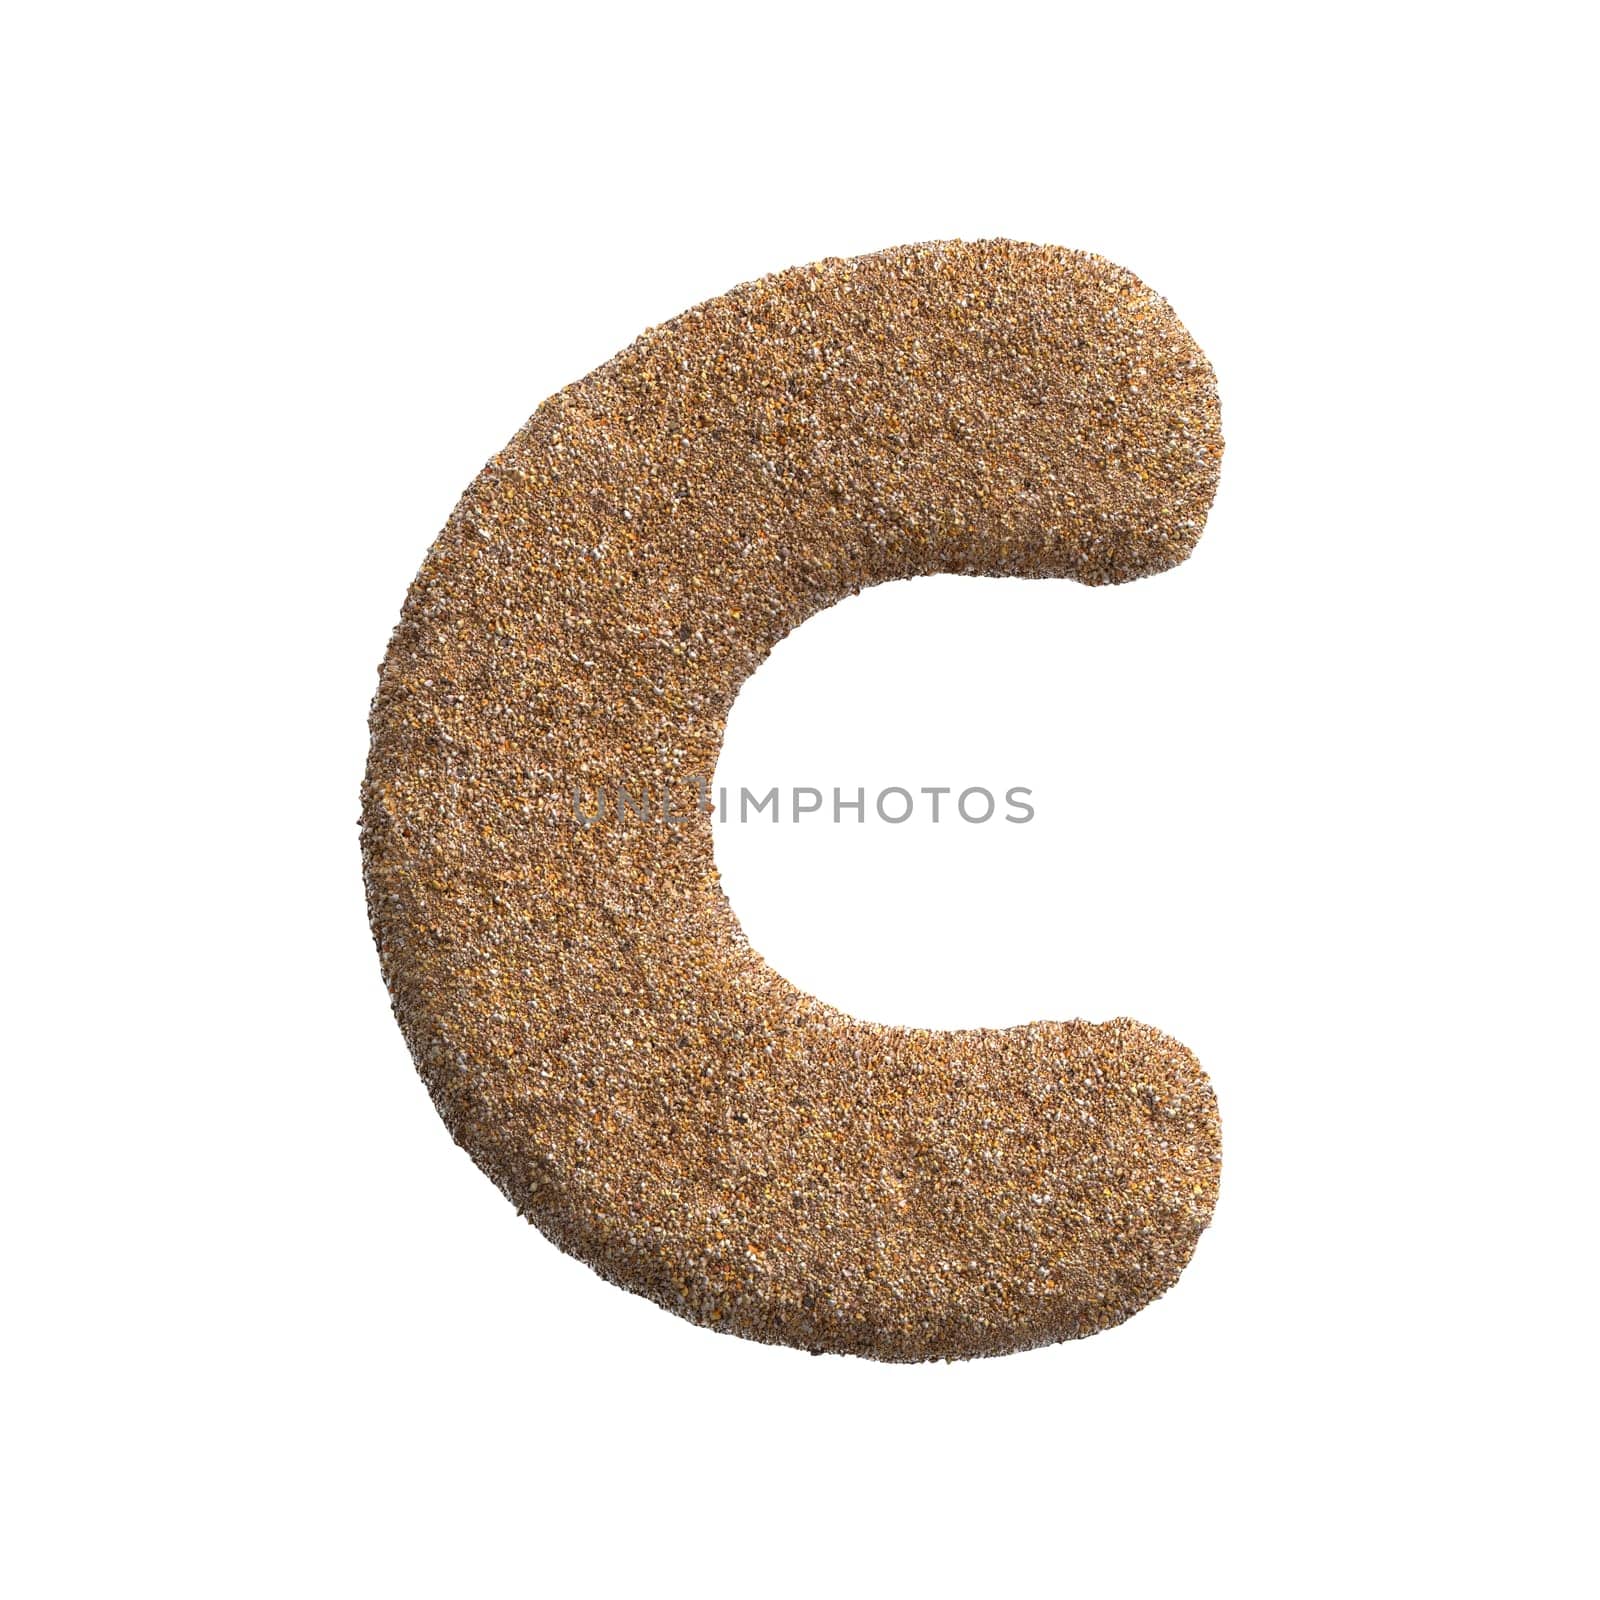 Sand letter C - Capital 3d beach font - Holidays, travel or ocean concepts by chrisroll